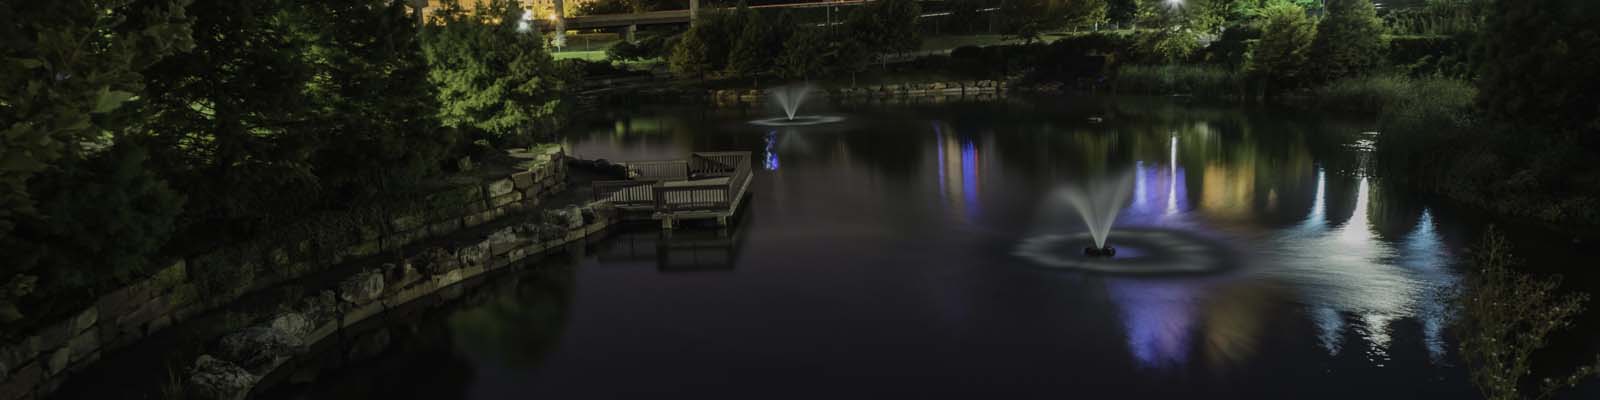 This is an image of a small pond in downtown Tulsa where ASTA-USA provides professional translation services.